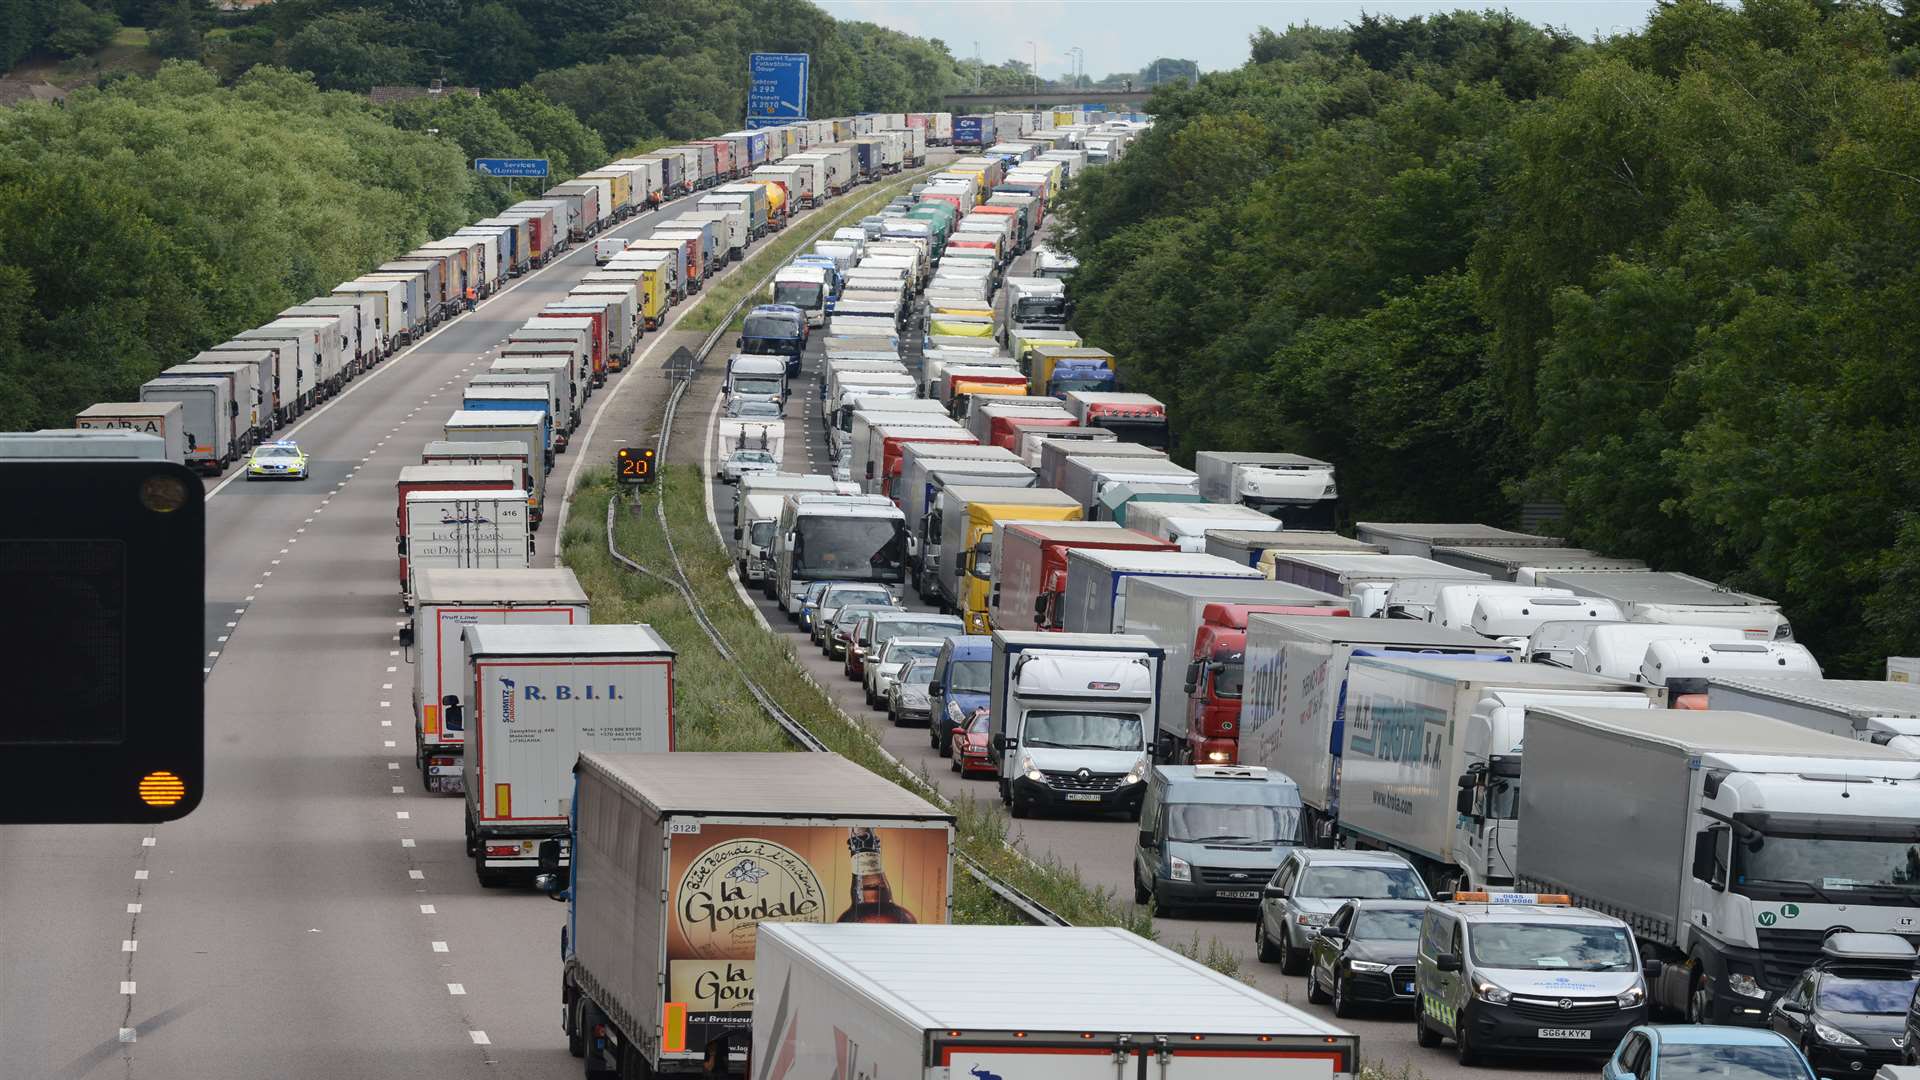 Khaldoun was caught up in operation stack when the fatal crash happened. Stock image